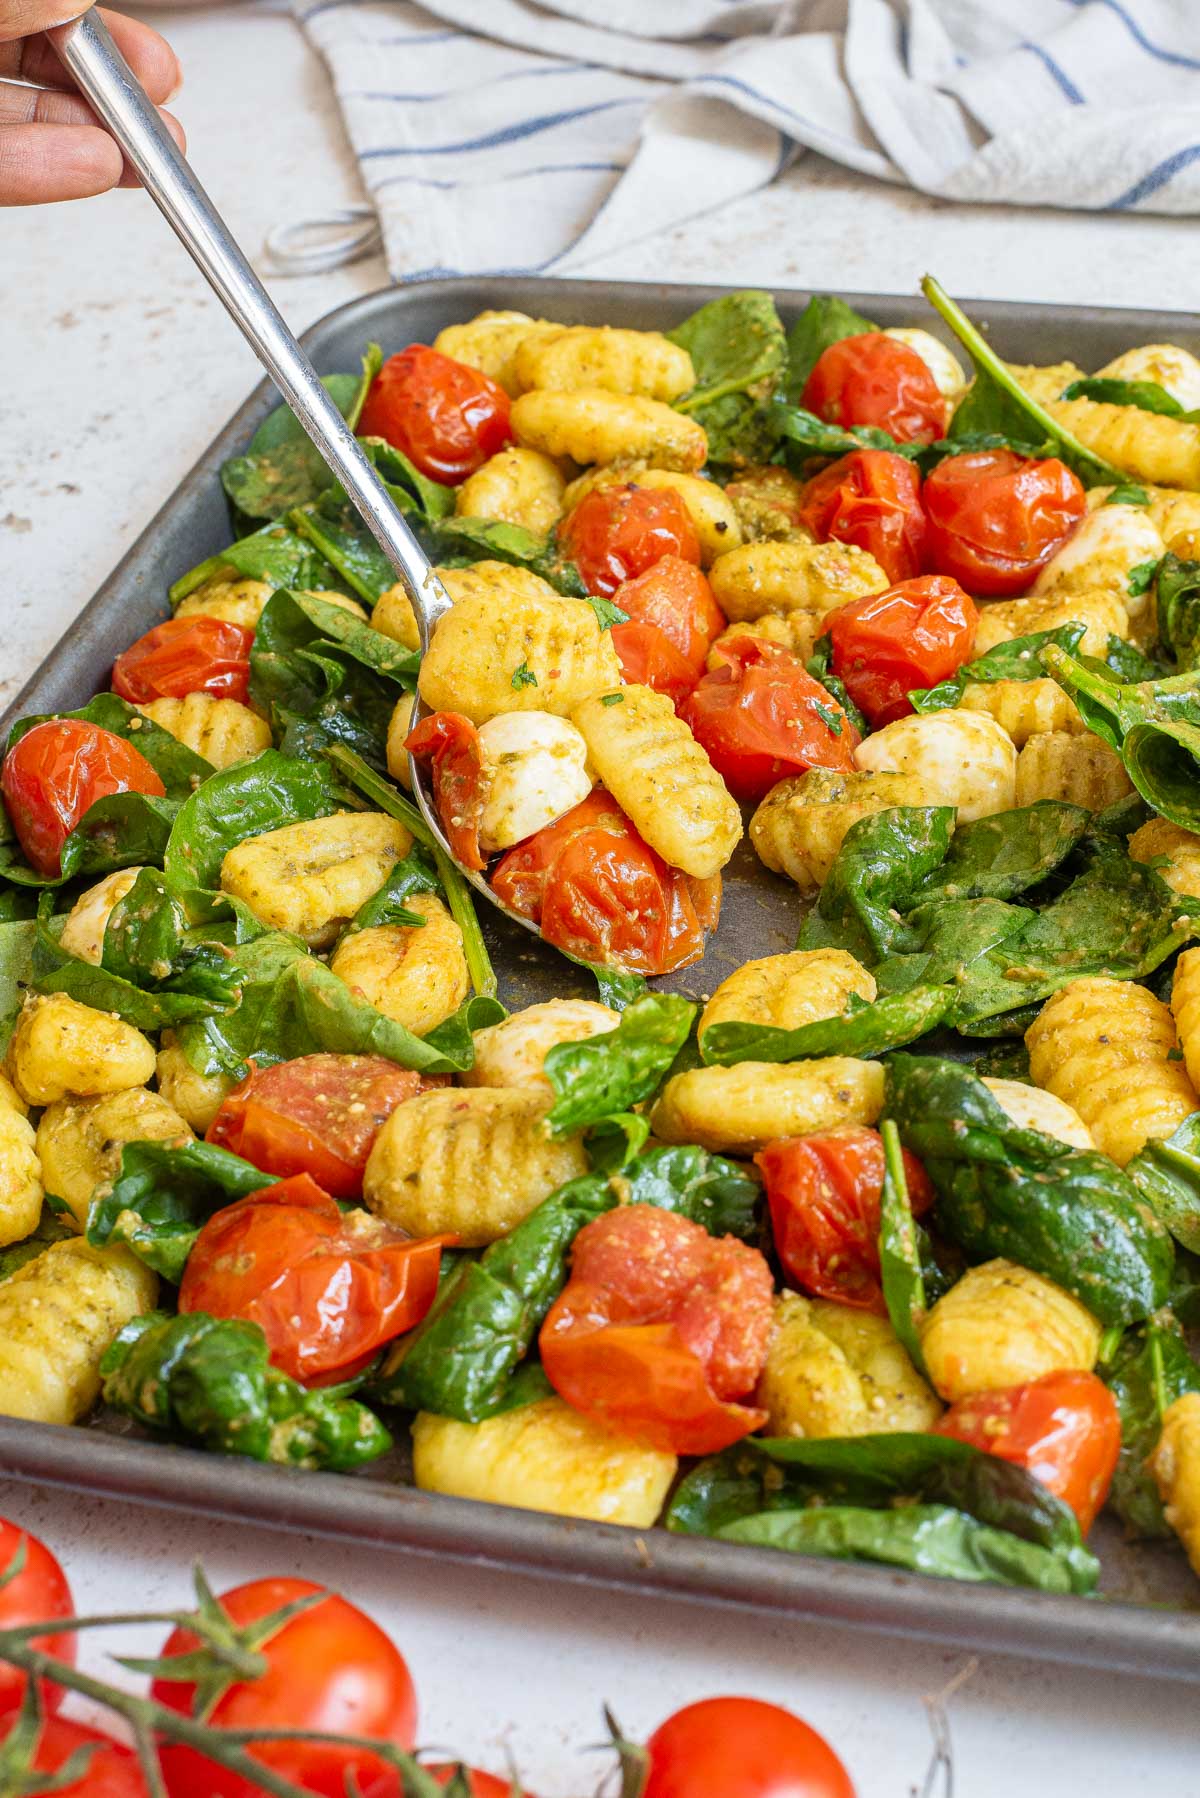 Gnocchi with cherry tomatoes and spinach on a sheet pan, showing a portion being served with a silver spoon.